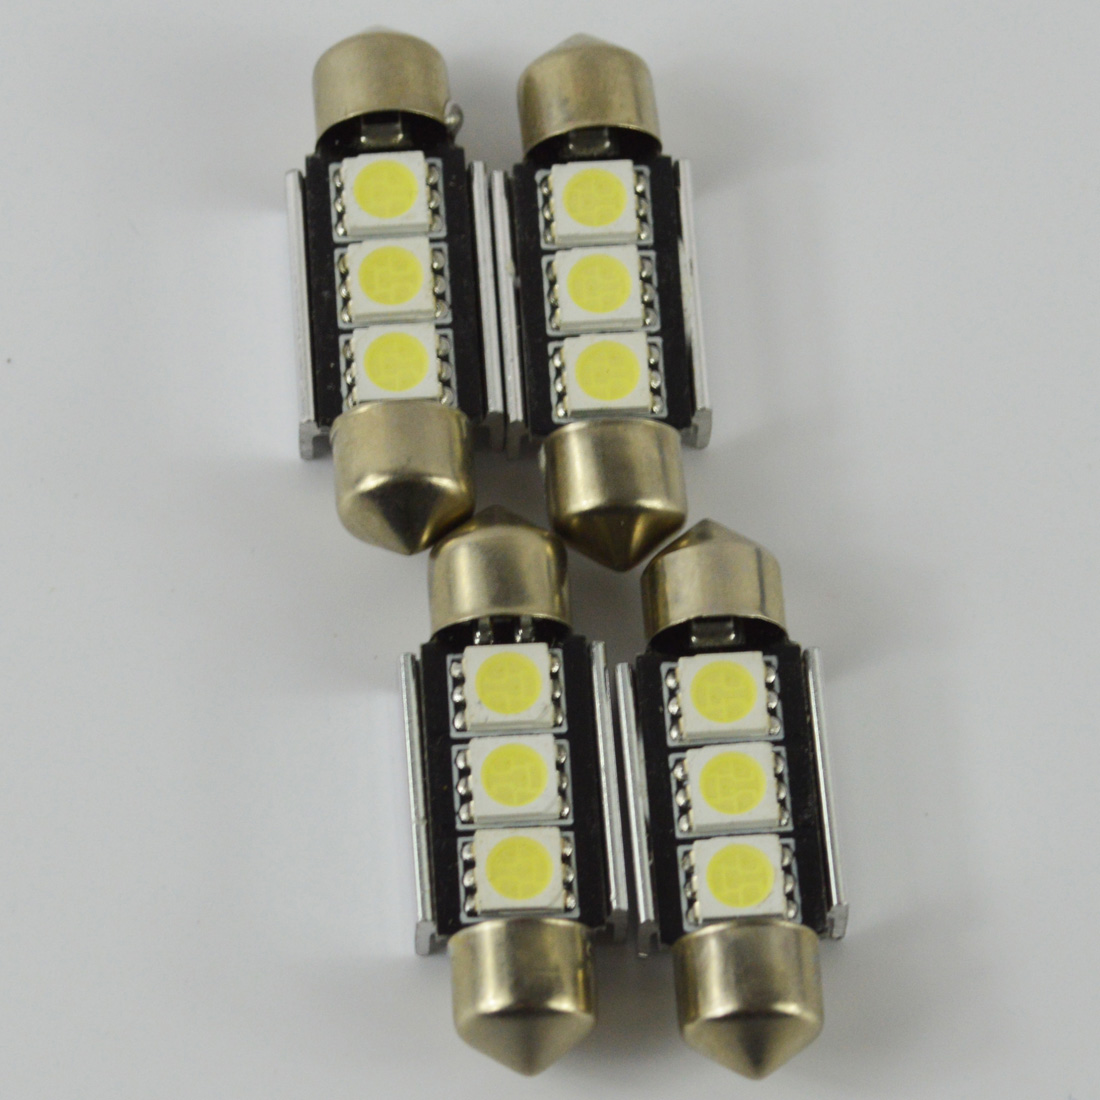 4 . C5W    Canbus 3smd 5050 36 31 39 42  12  Canbus C5W         